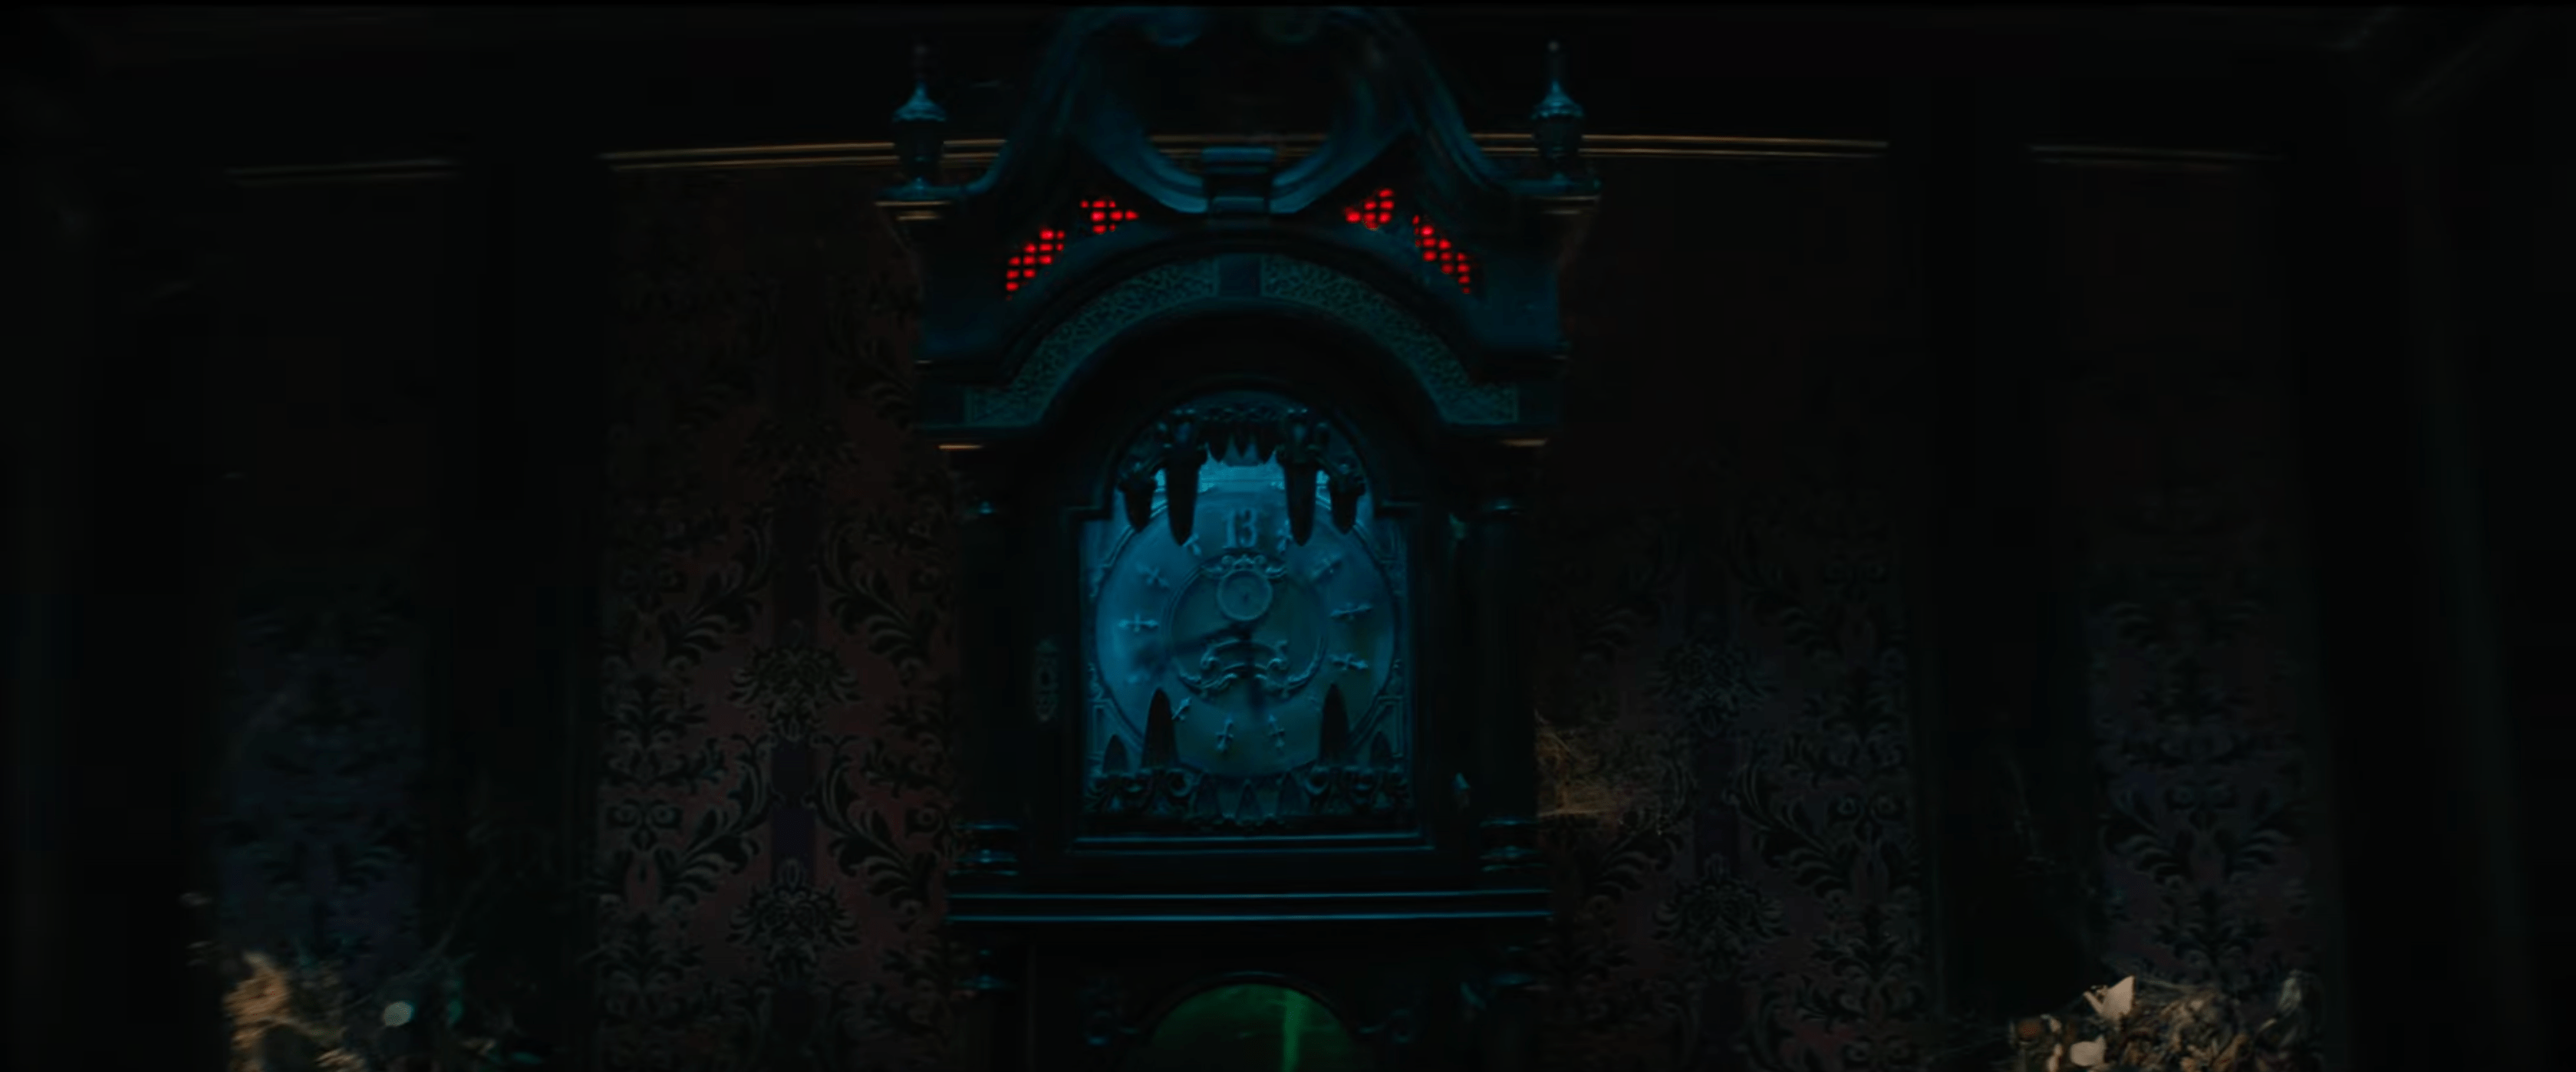 The grandfather clock from the haunted mansion trailer